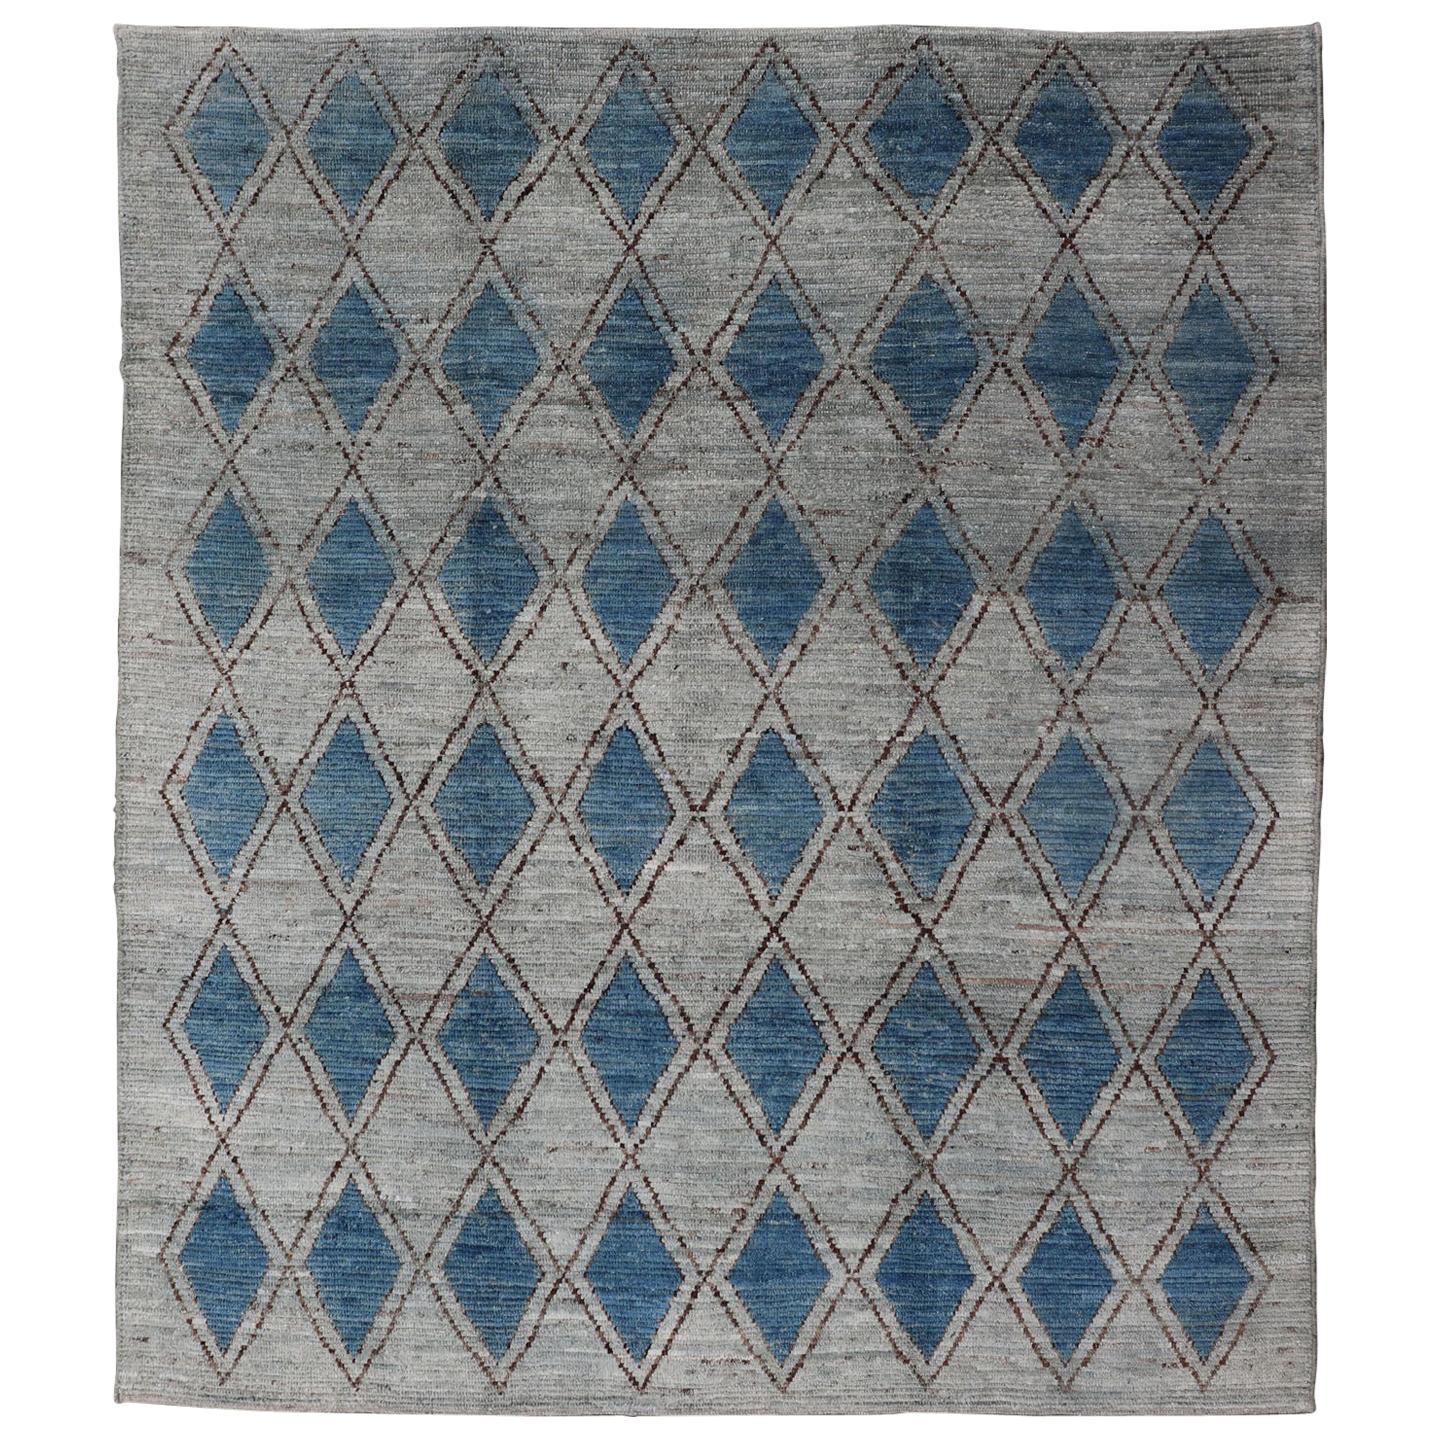 Modern Casual Design Moroccan Design in Diamond Pattern in Gray, Blue, and Brown